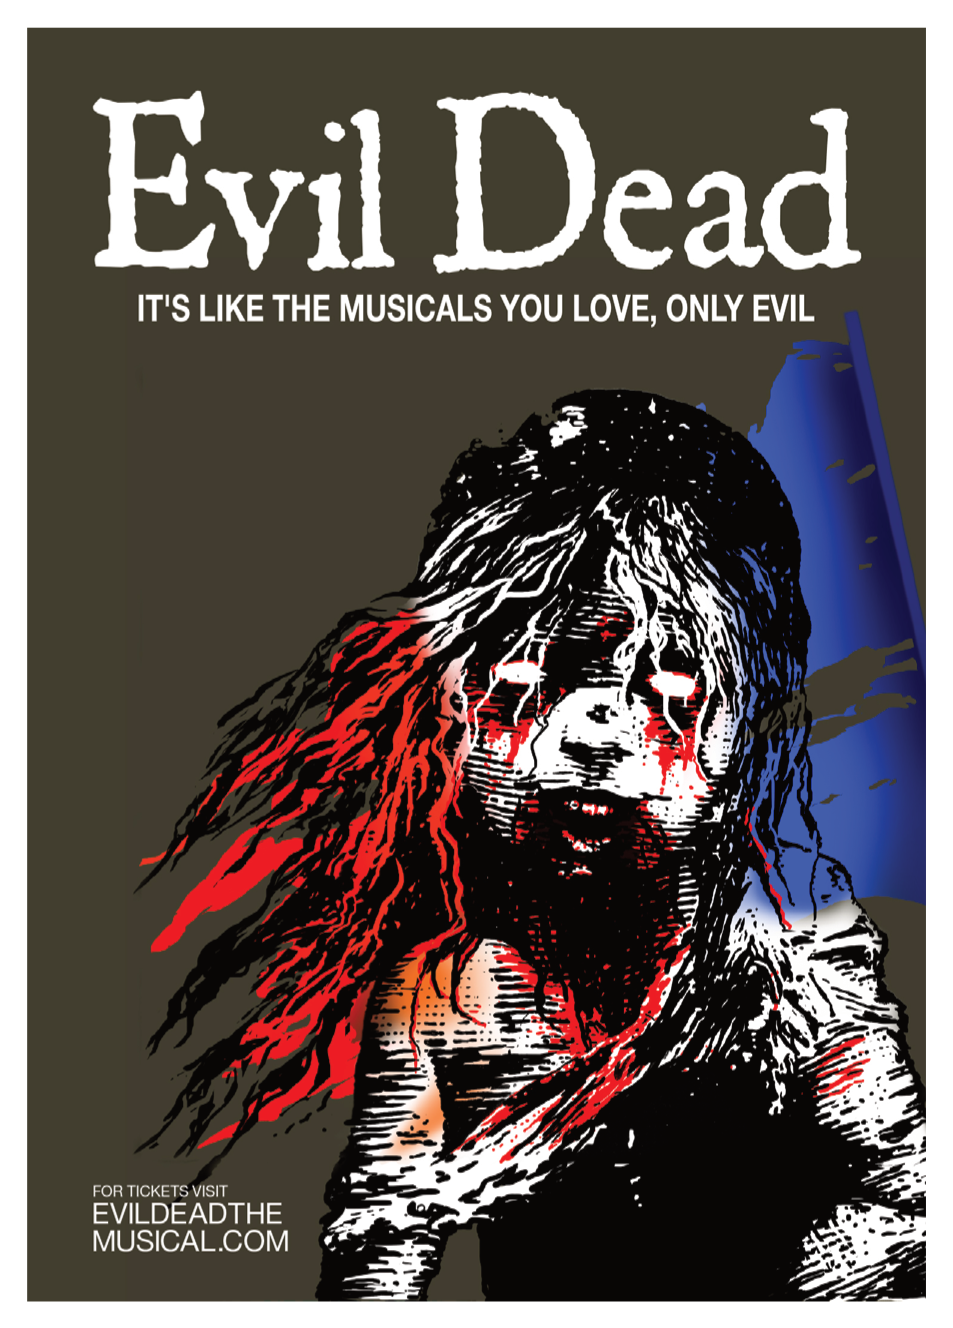 An Evil Dead parody poster of Les Miserable. The girl, Cossette, looks like a zombie. Poster reads Evil Dead. It's like the musicals you love, only evil.